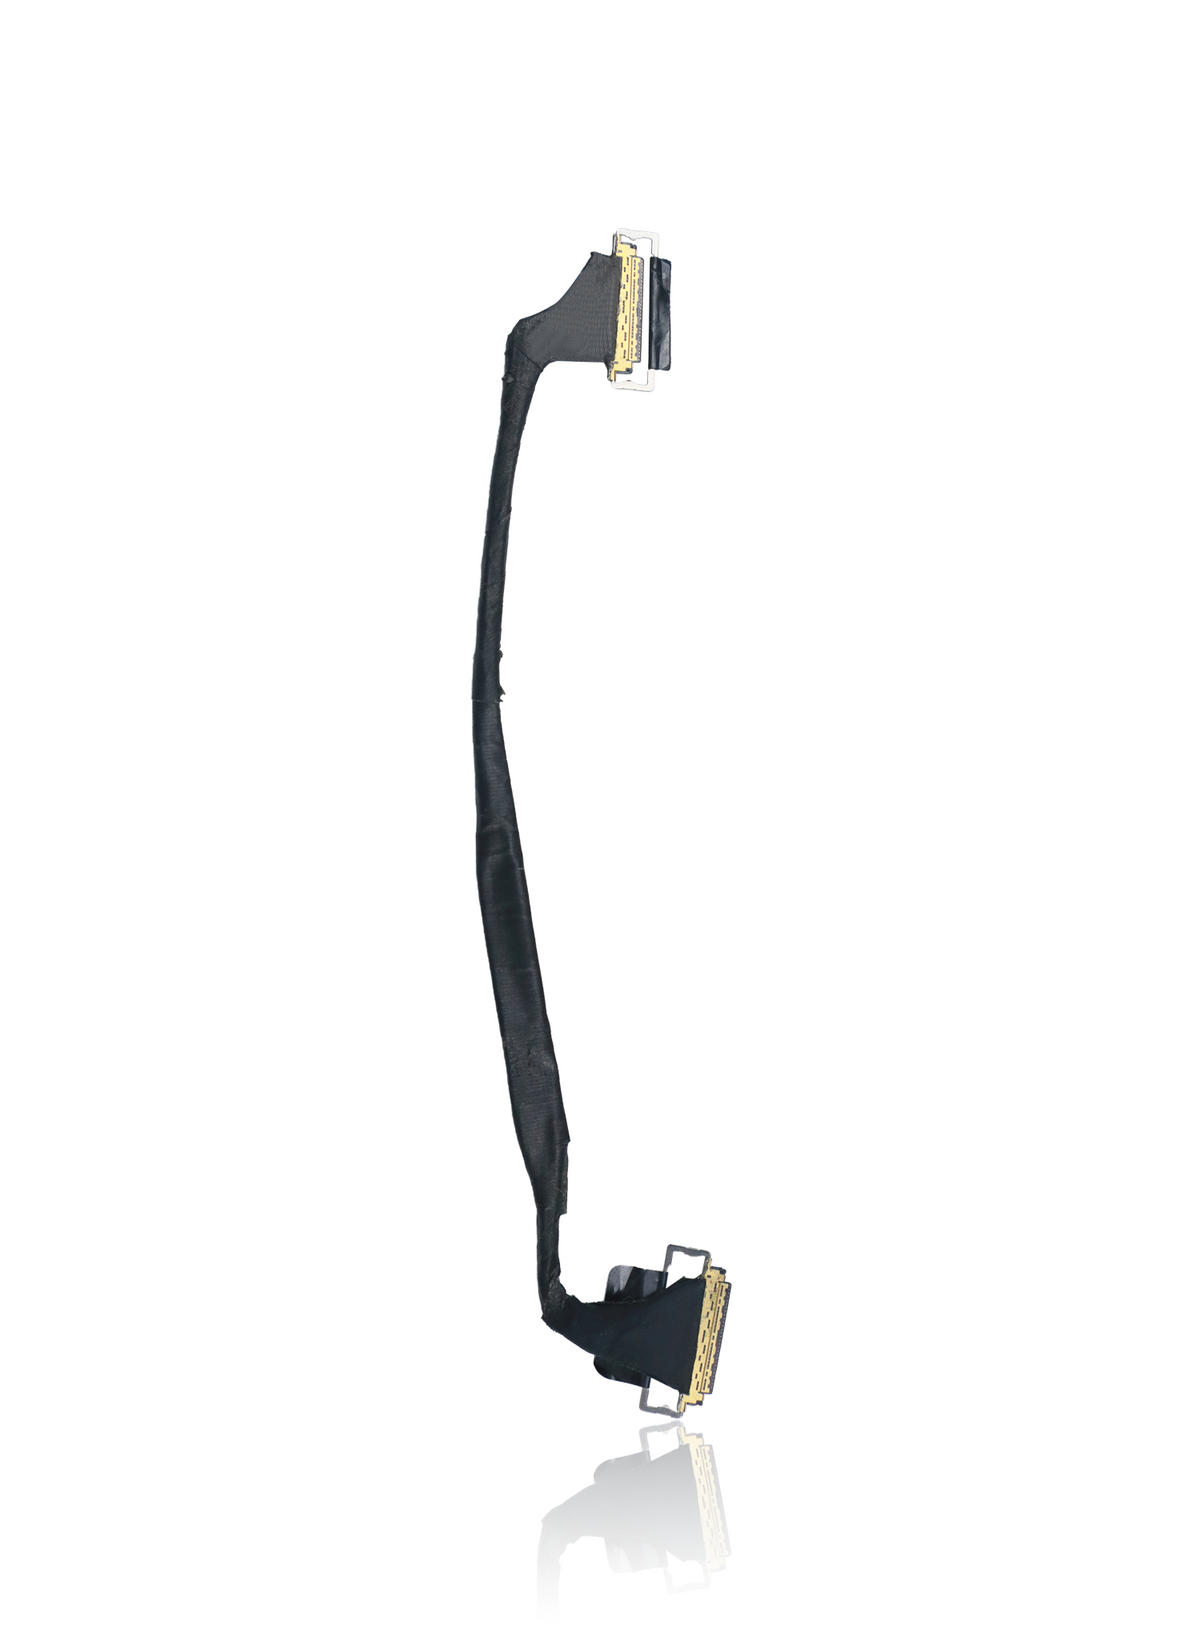 DISPLAY LVDS CABLE FOR MACBOOK PRO UNIBODY 13" A1278  (MID 2009 / MID 2010 / LATE 2008) / MACBOOK UNIBODY 13" A1278  (LATE 2008)